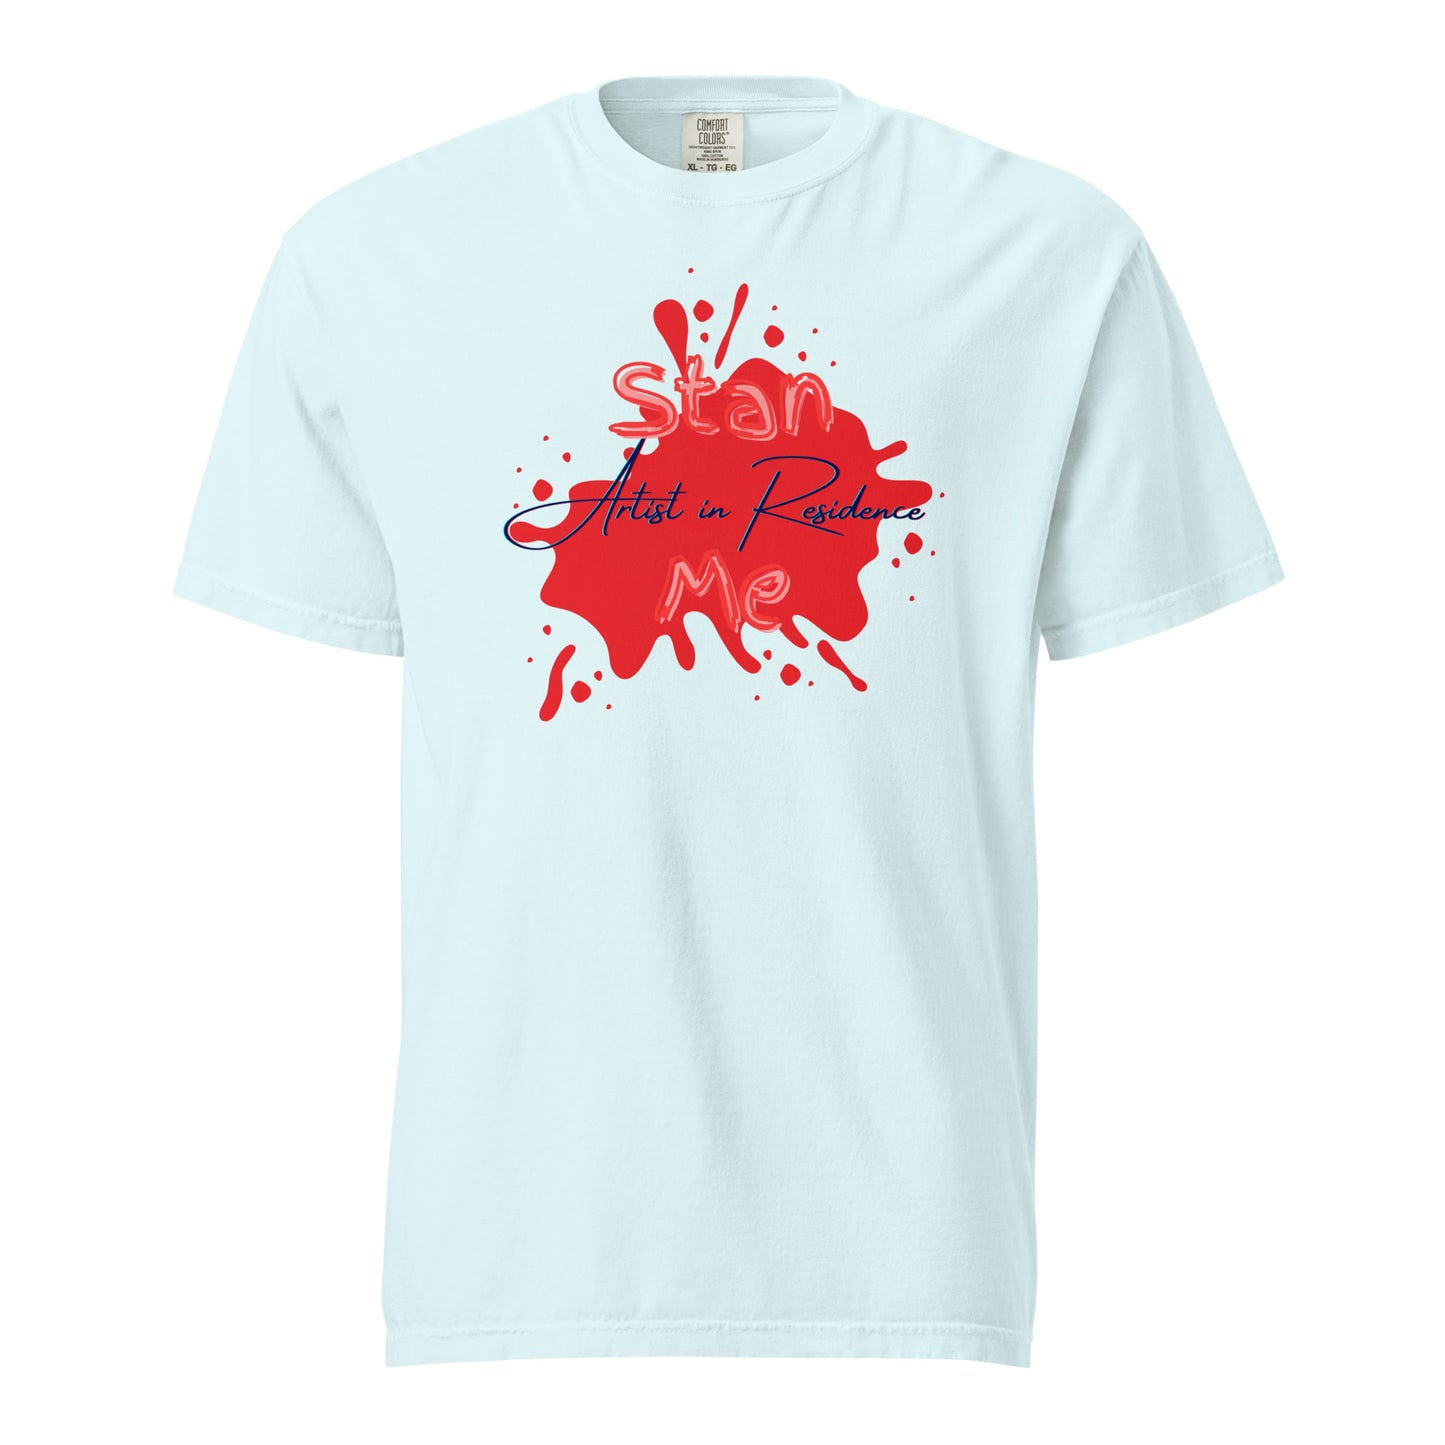 “Stan Me, Artist in Residence” tees featuring paint splatter designs, blending artistic creativity with stan culture. Available in 8 unique styles. Perfect for artists looking to attract fans and gigs. ice blue tee